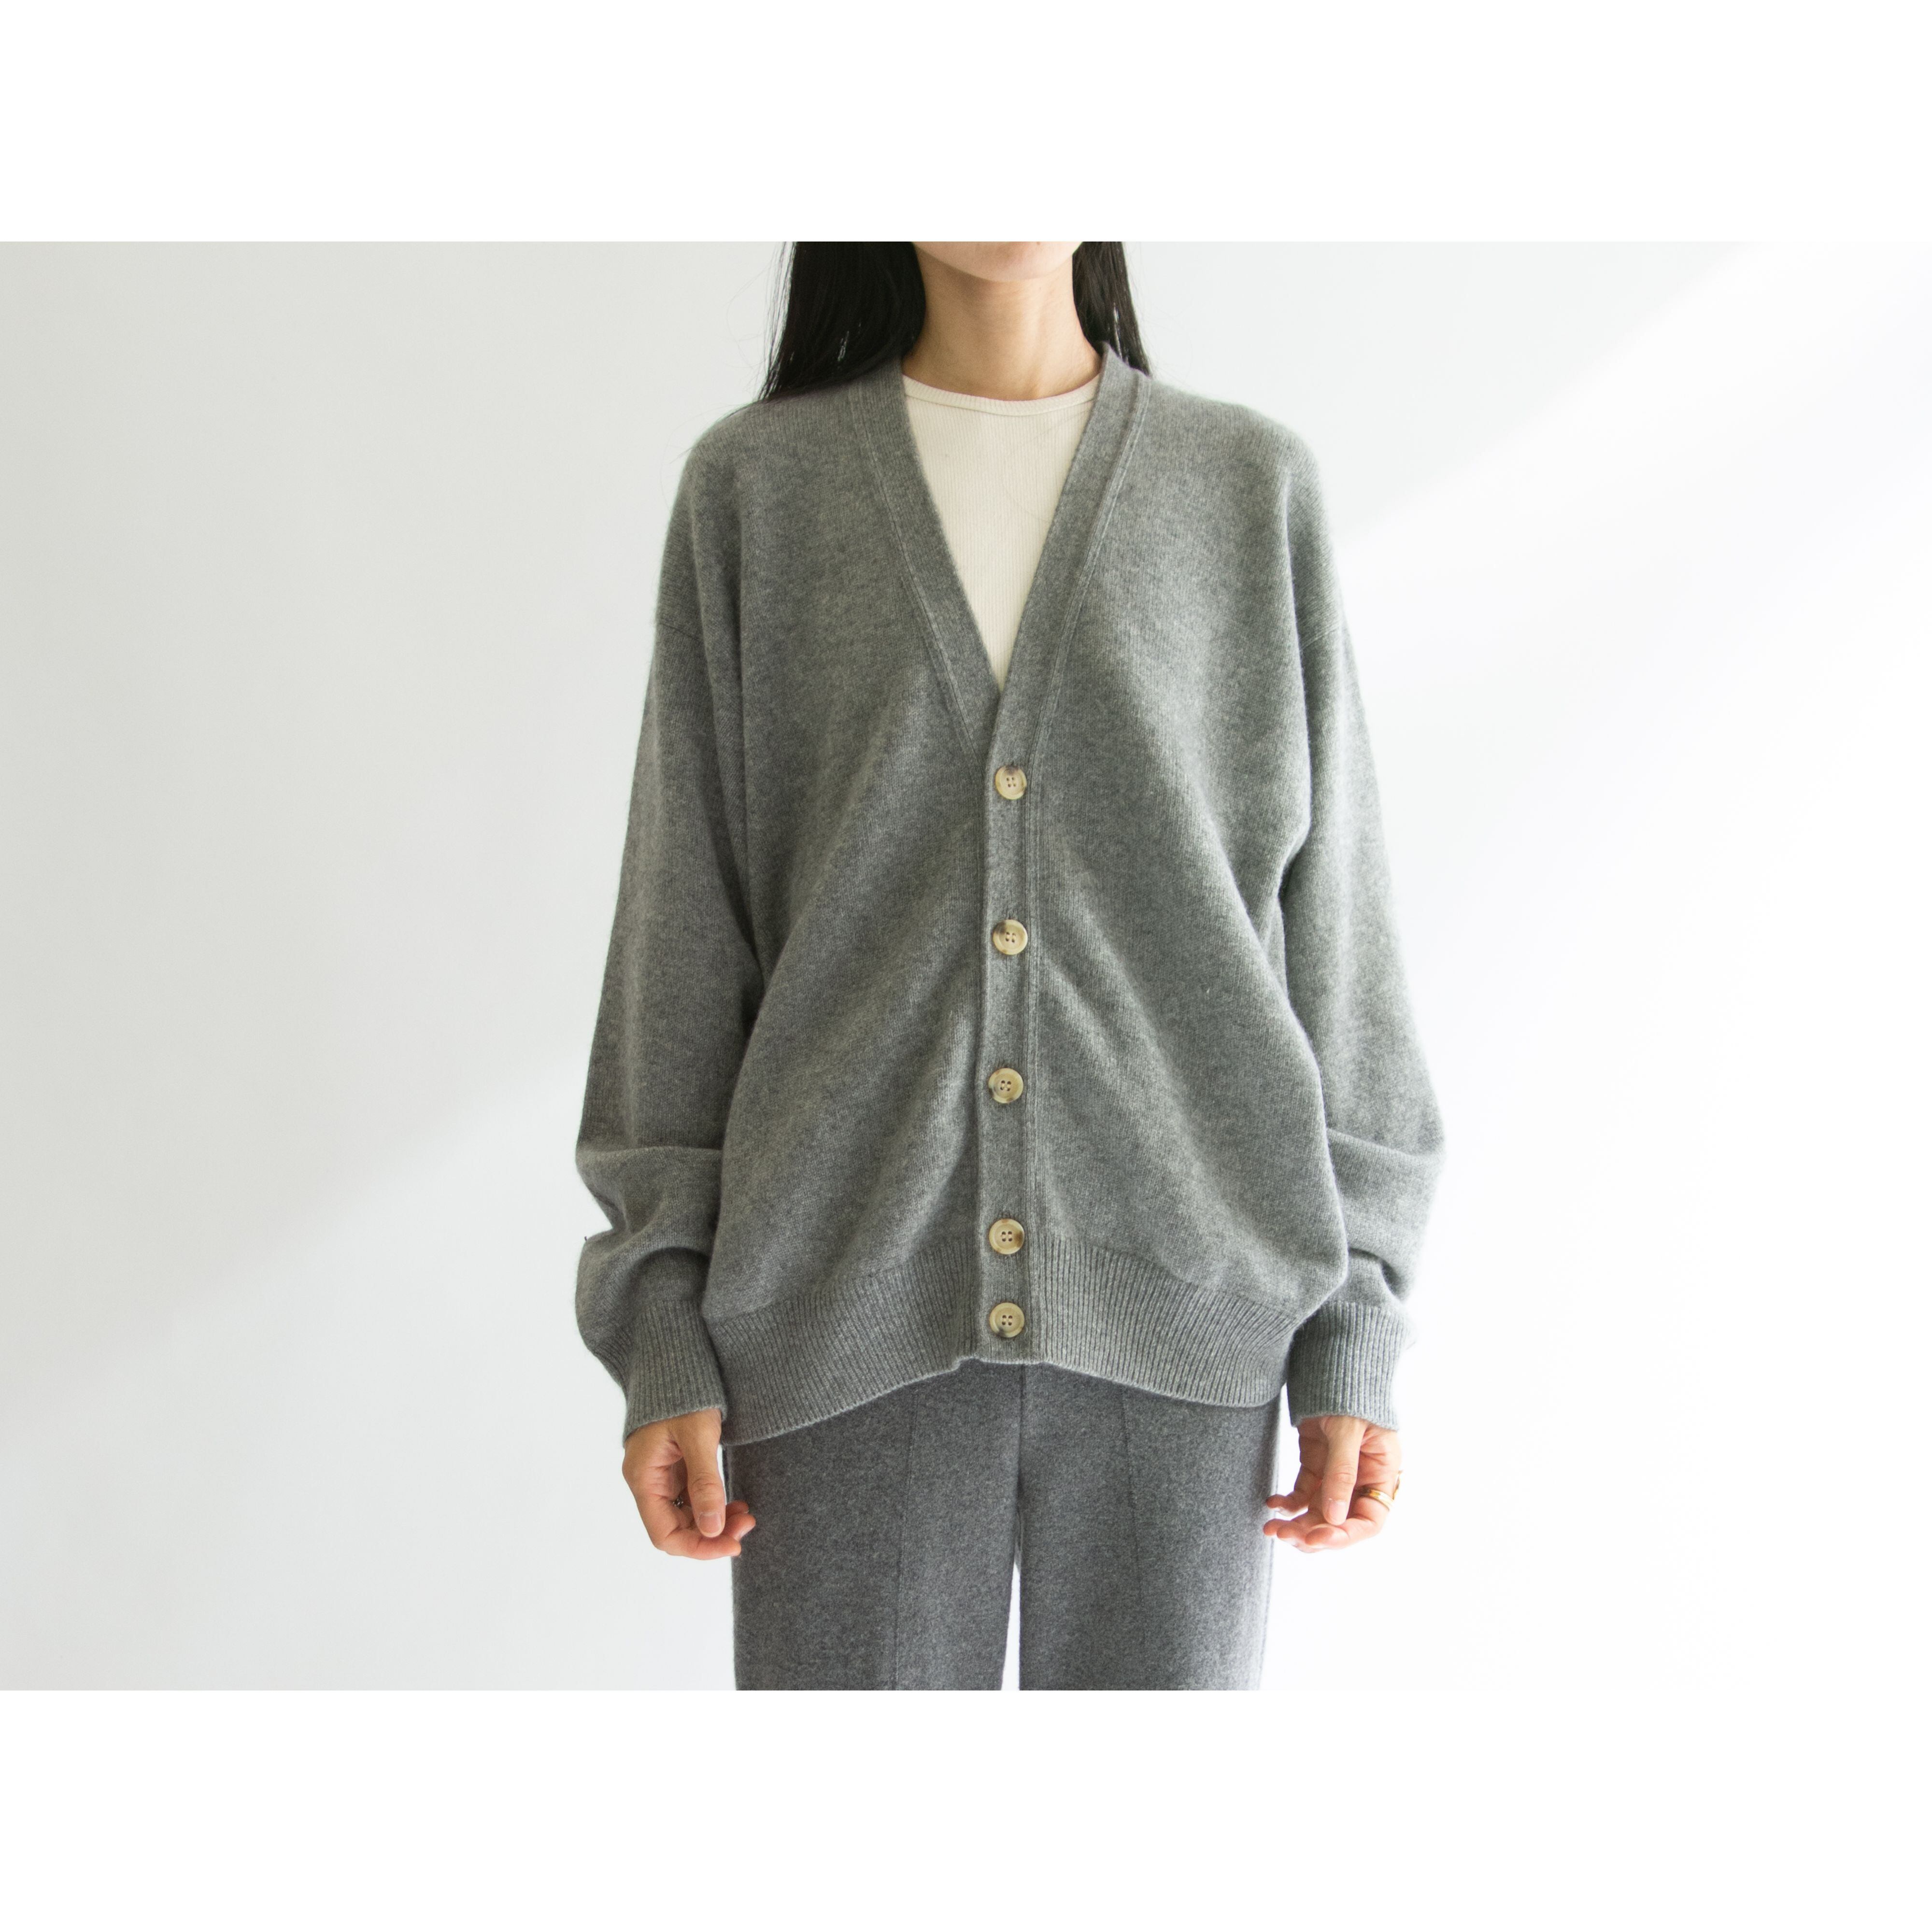 【Unknown Brand】Made in Japan 100% Cashmere Cardigan（日本製 カシミヤニットカーディガン）